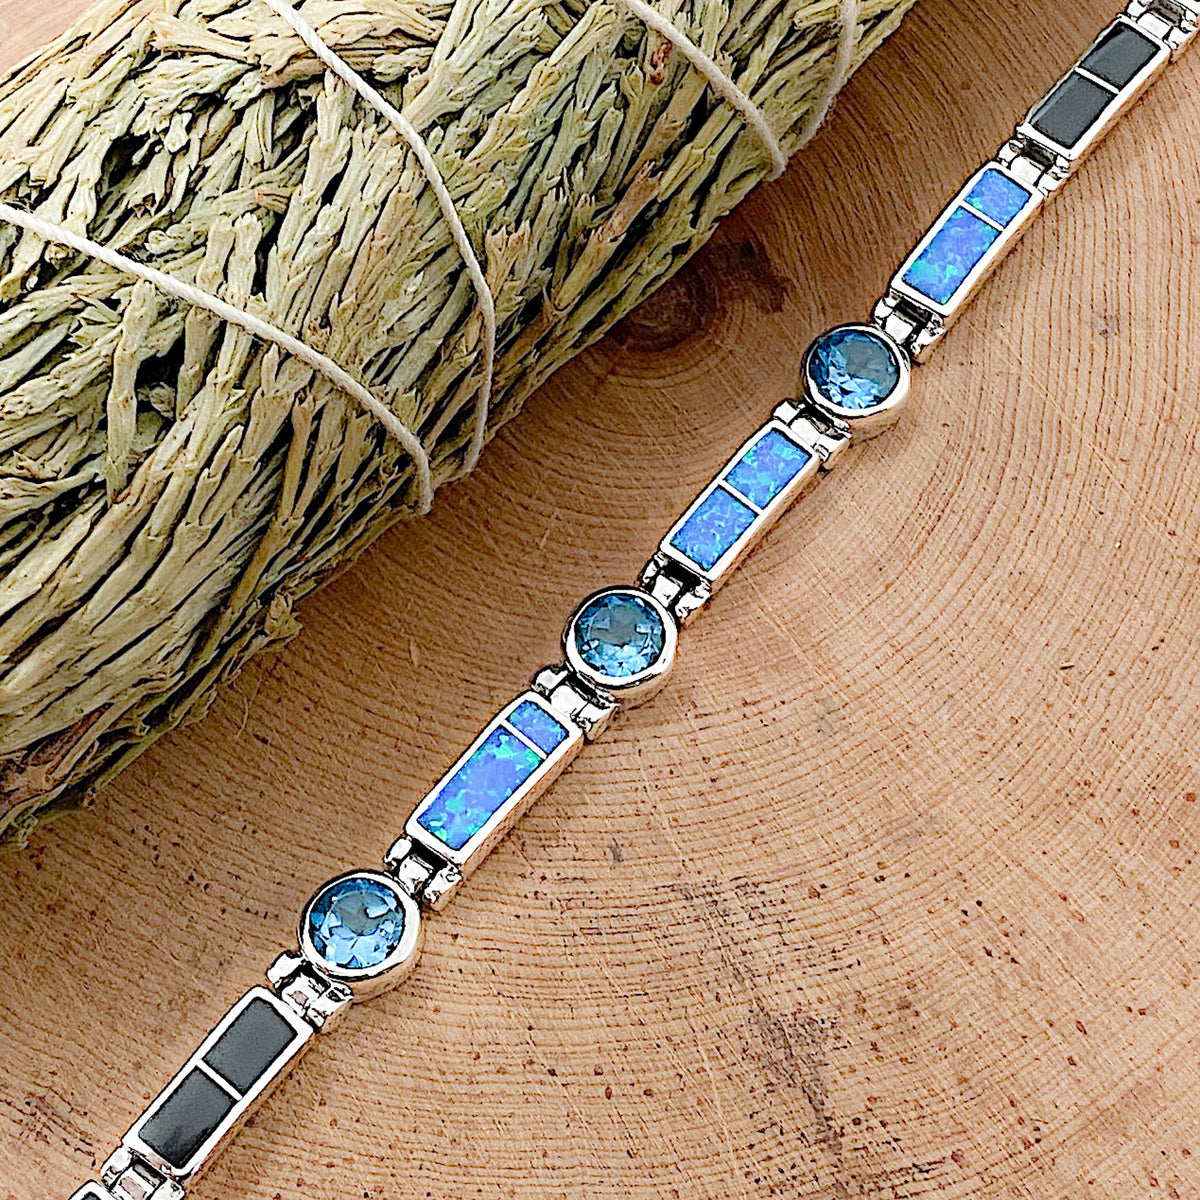 A sterling silver bracelet that is inlaid with Black Jade, Blue Cultured Opal, and is set with three London Blue Topaz stones laid flat